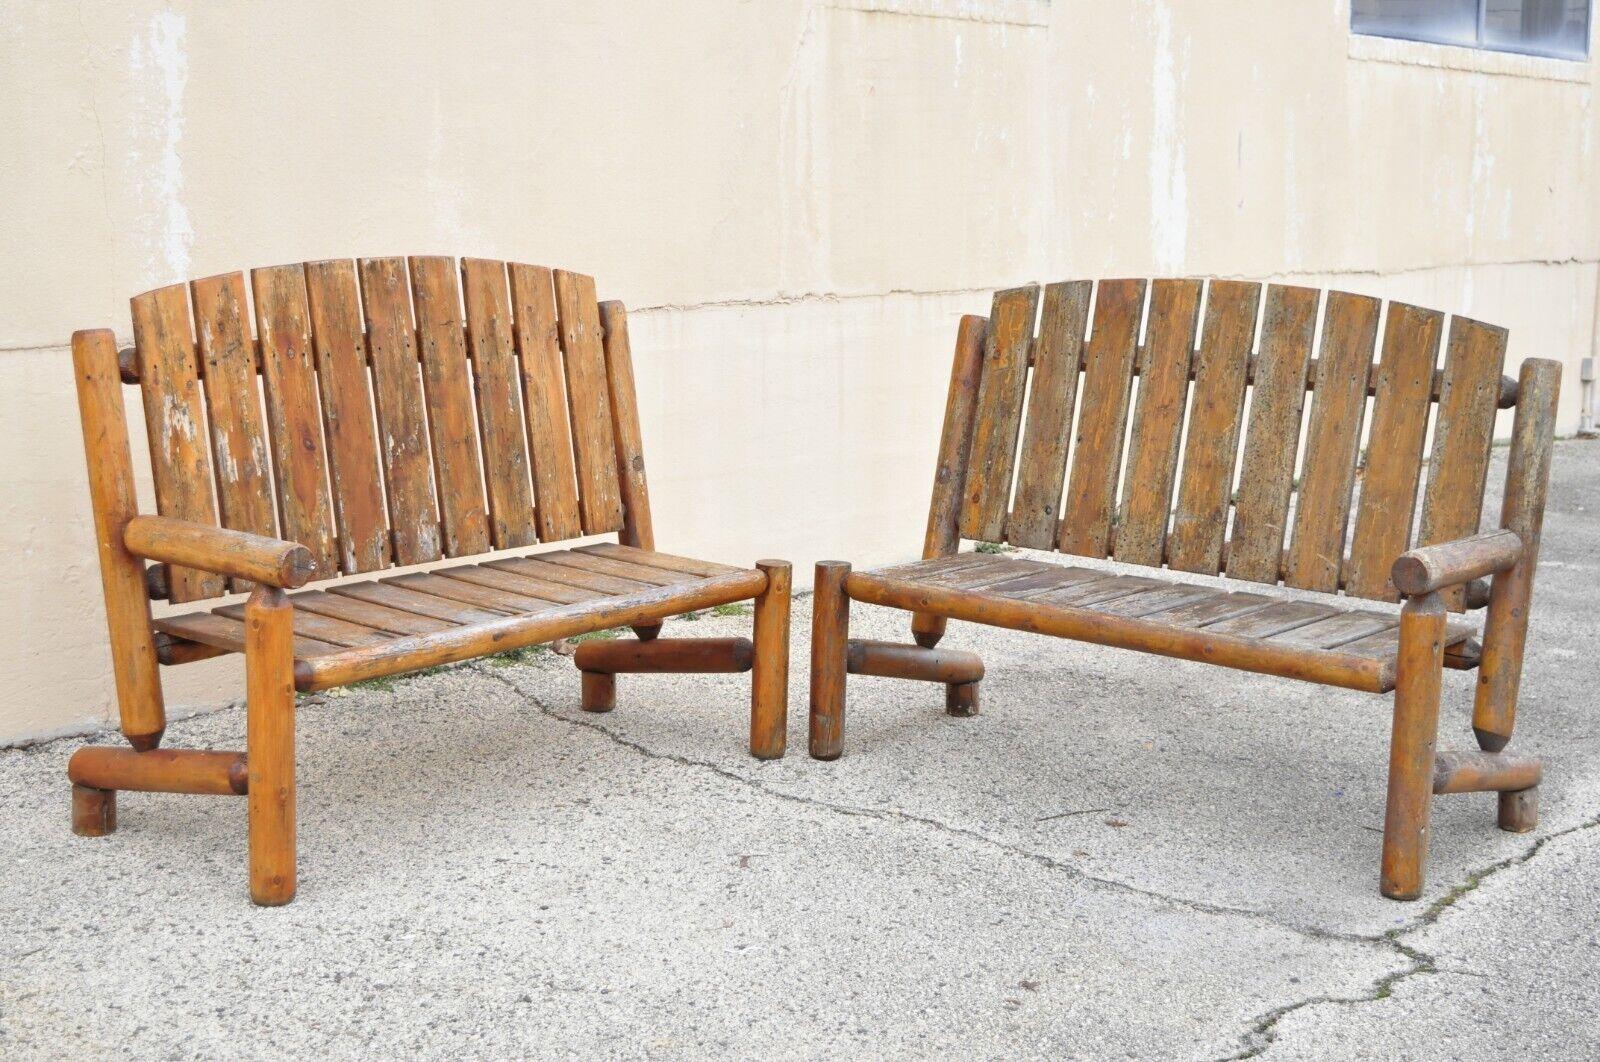 Log cabin Primitive Adirondack wooden log outdoor bench sofa set - 2 pcs. Item features (2) armless sections, can be used as one long sofa or 2 separate pieces with example layouts pictured, solid wood construction, distressed finish, very nice set,